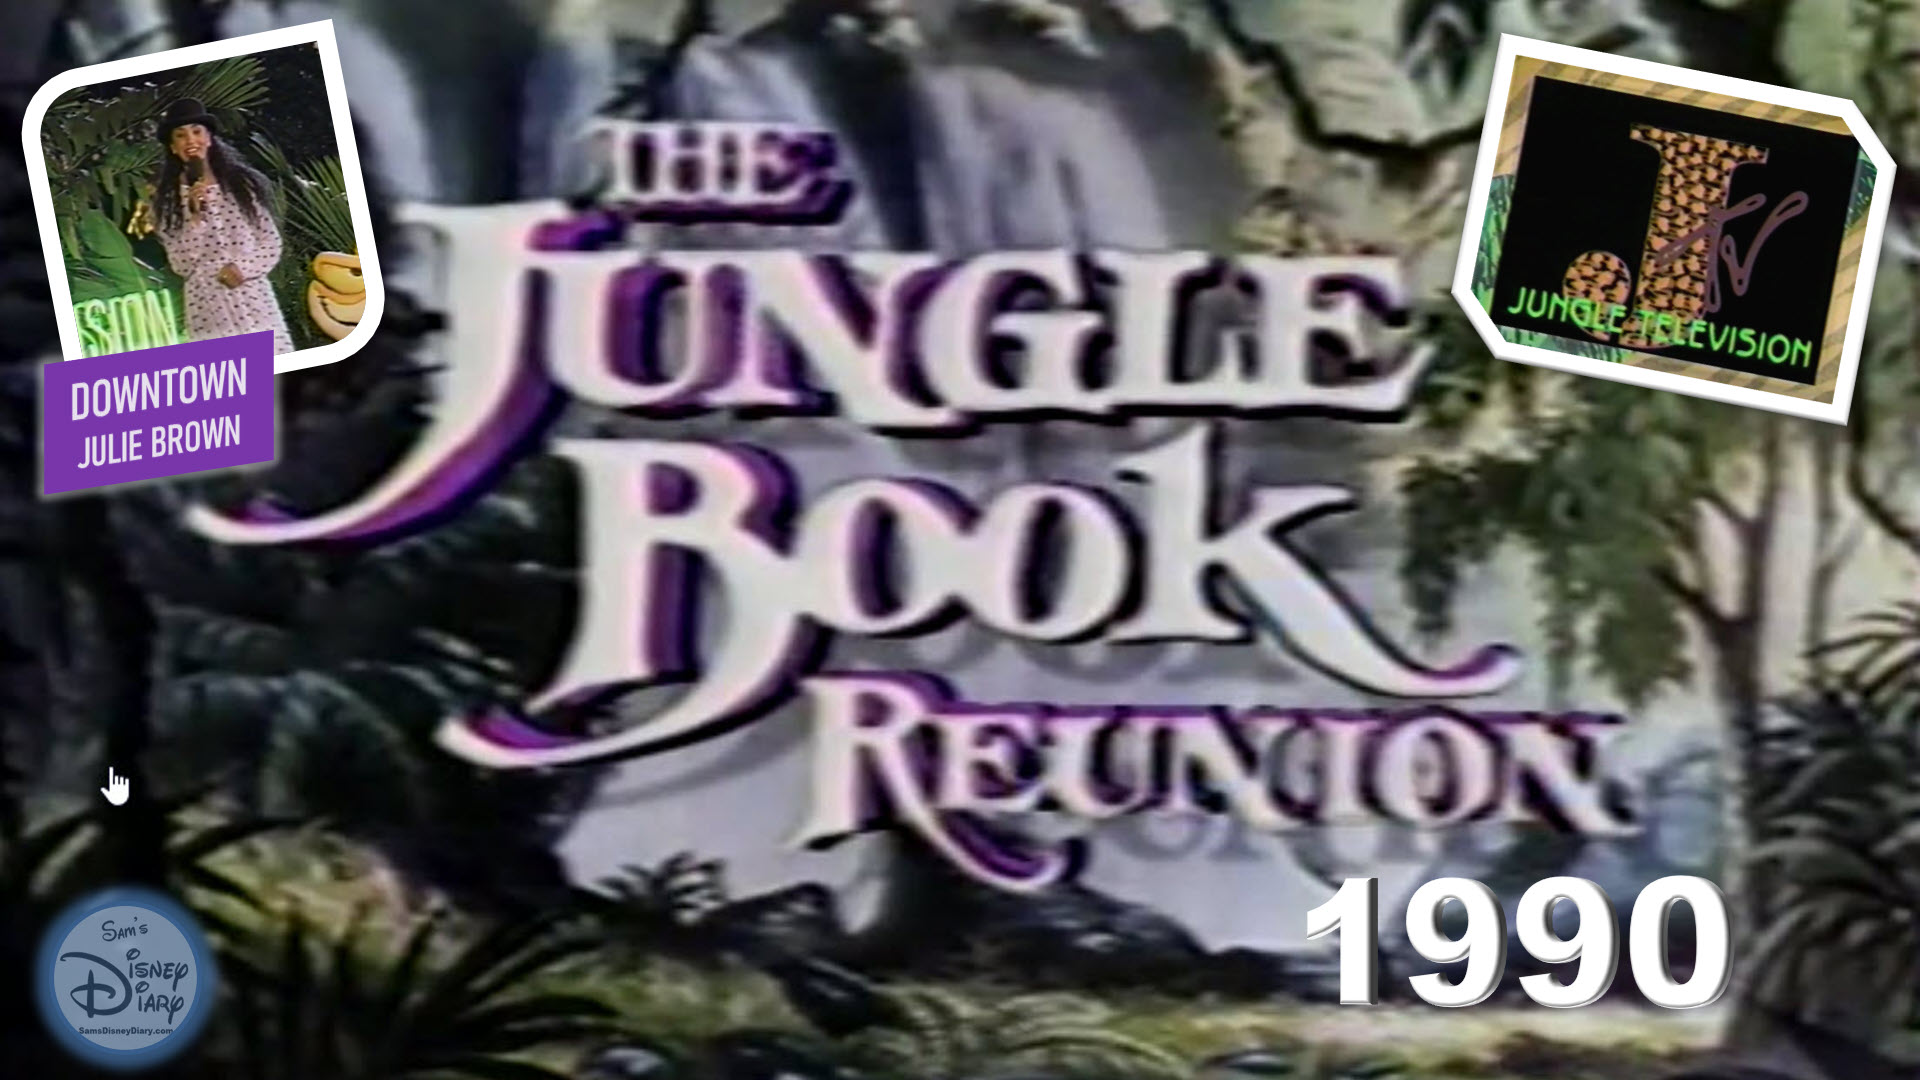 The Jungle Book Reunion, with Down Town Julie Brown (1990) Jungle TV